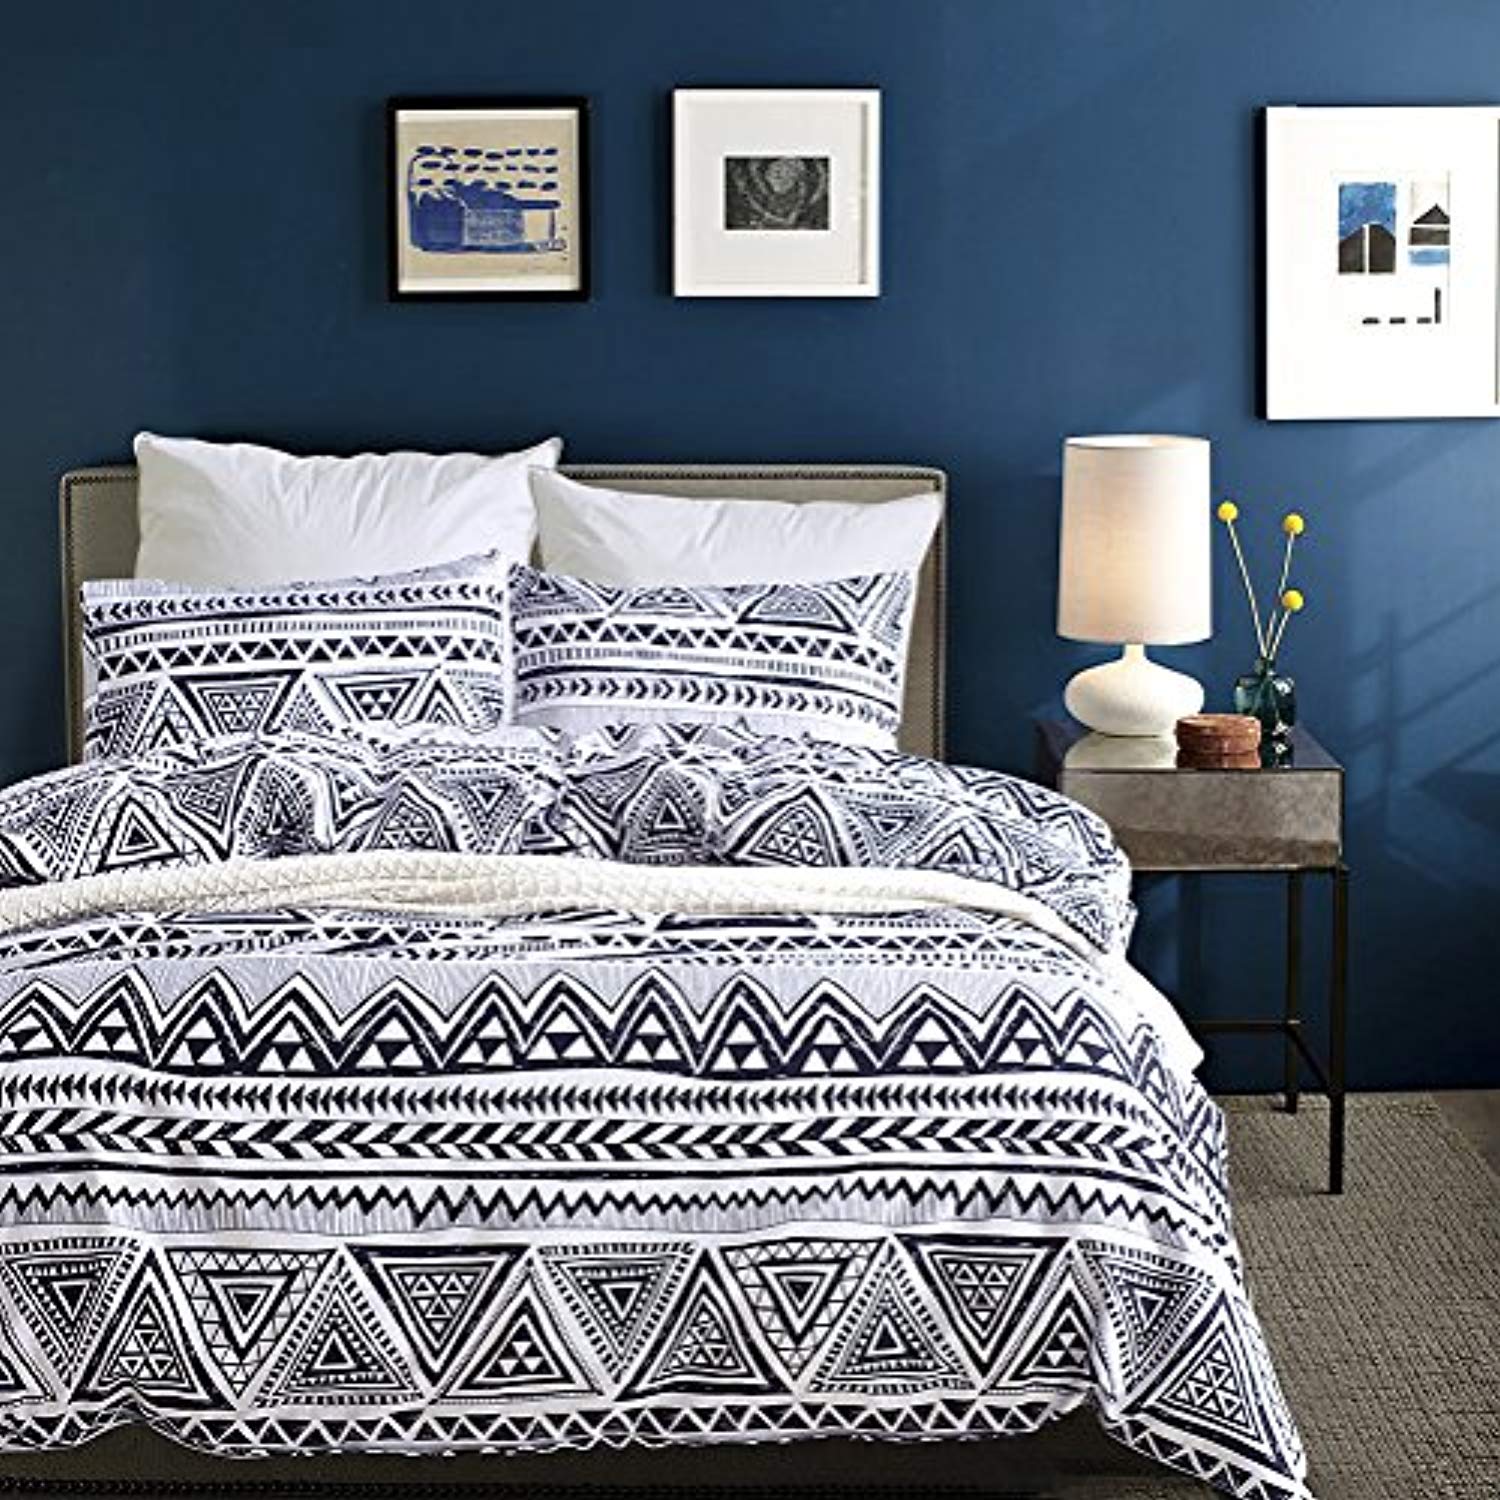 Couturebridal Bed Duvet Cover Set Beach Theme Queem Double African